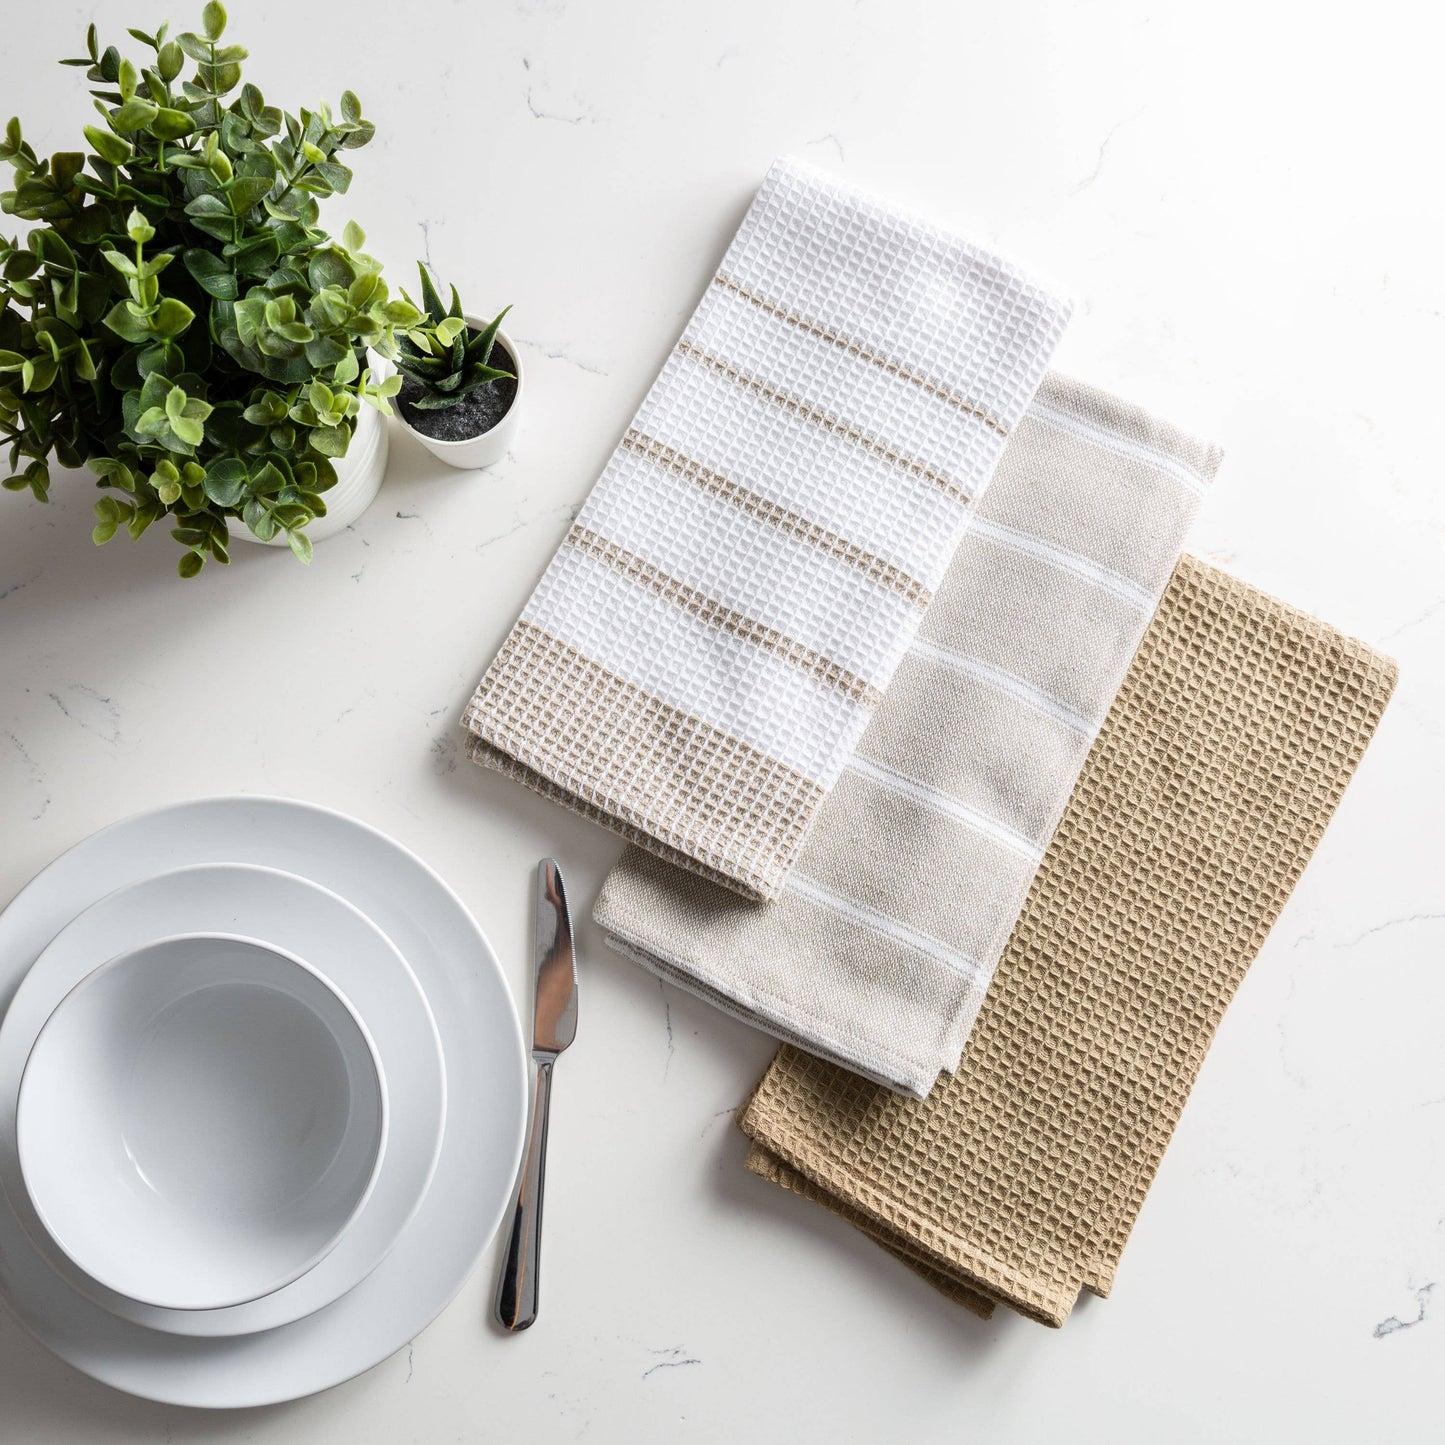 Fabstyles - Fabstyles Fouta Kitchen Towel - Set of 3